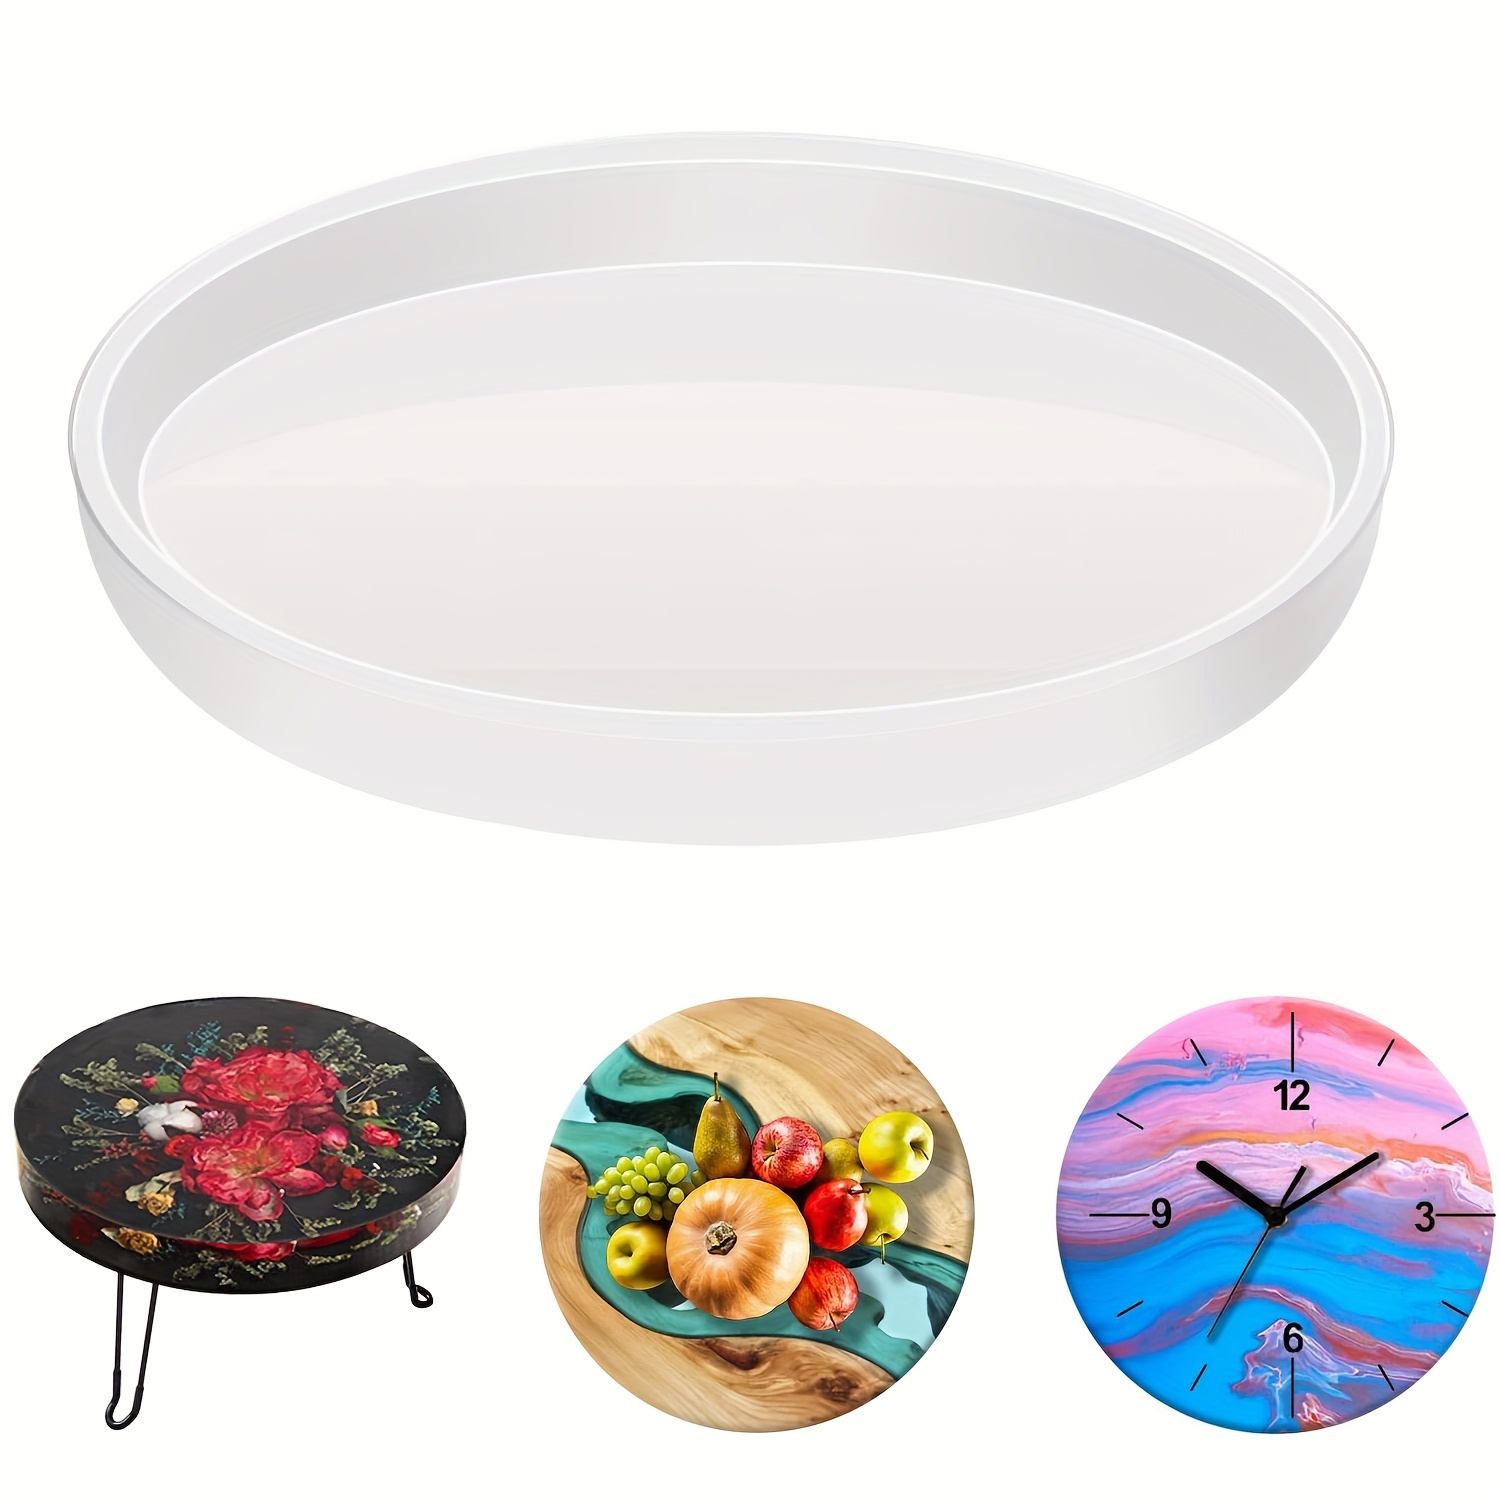 Extra Large River Table Resin Molds, Xl Round Table Silicone Molds